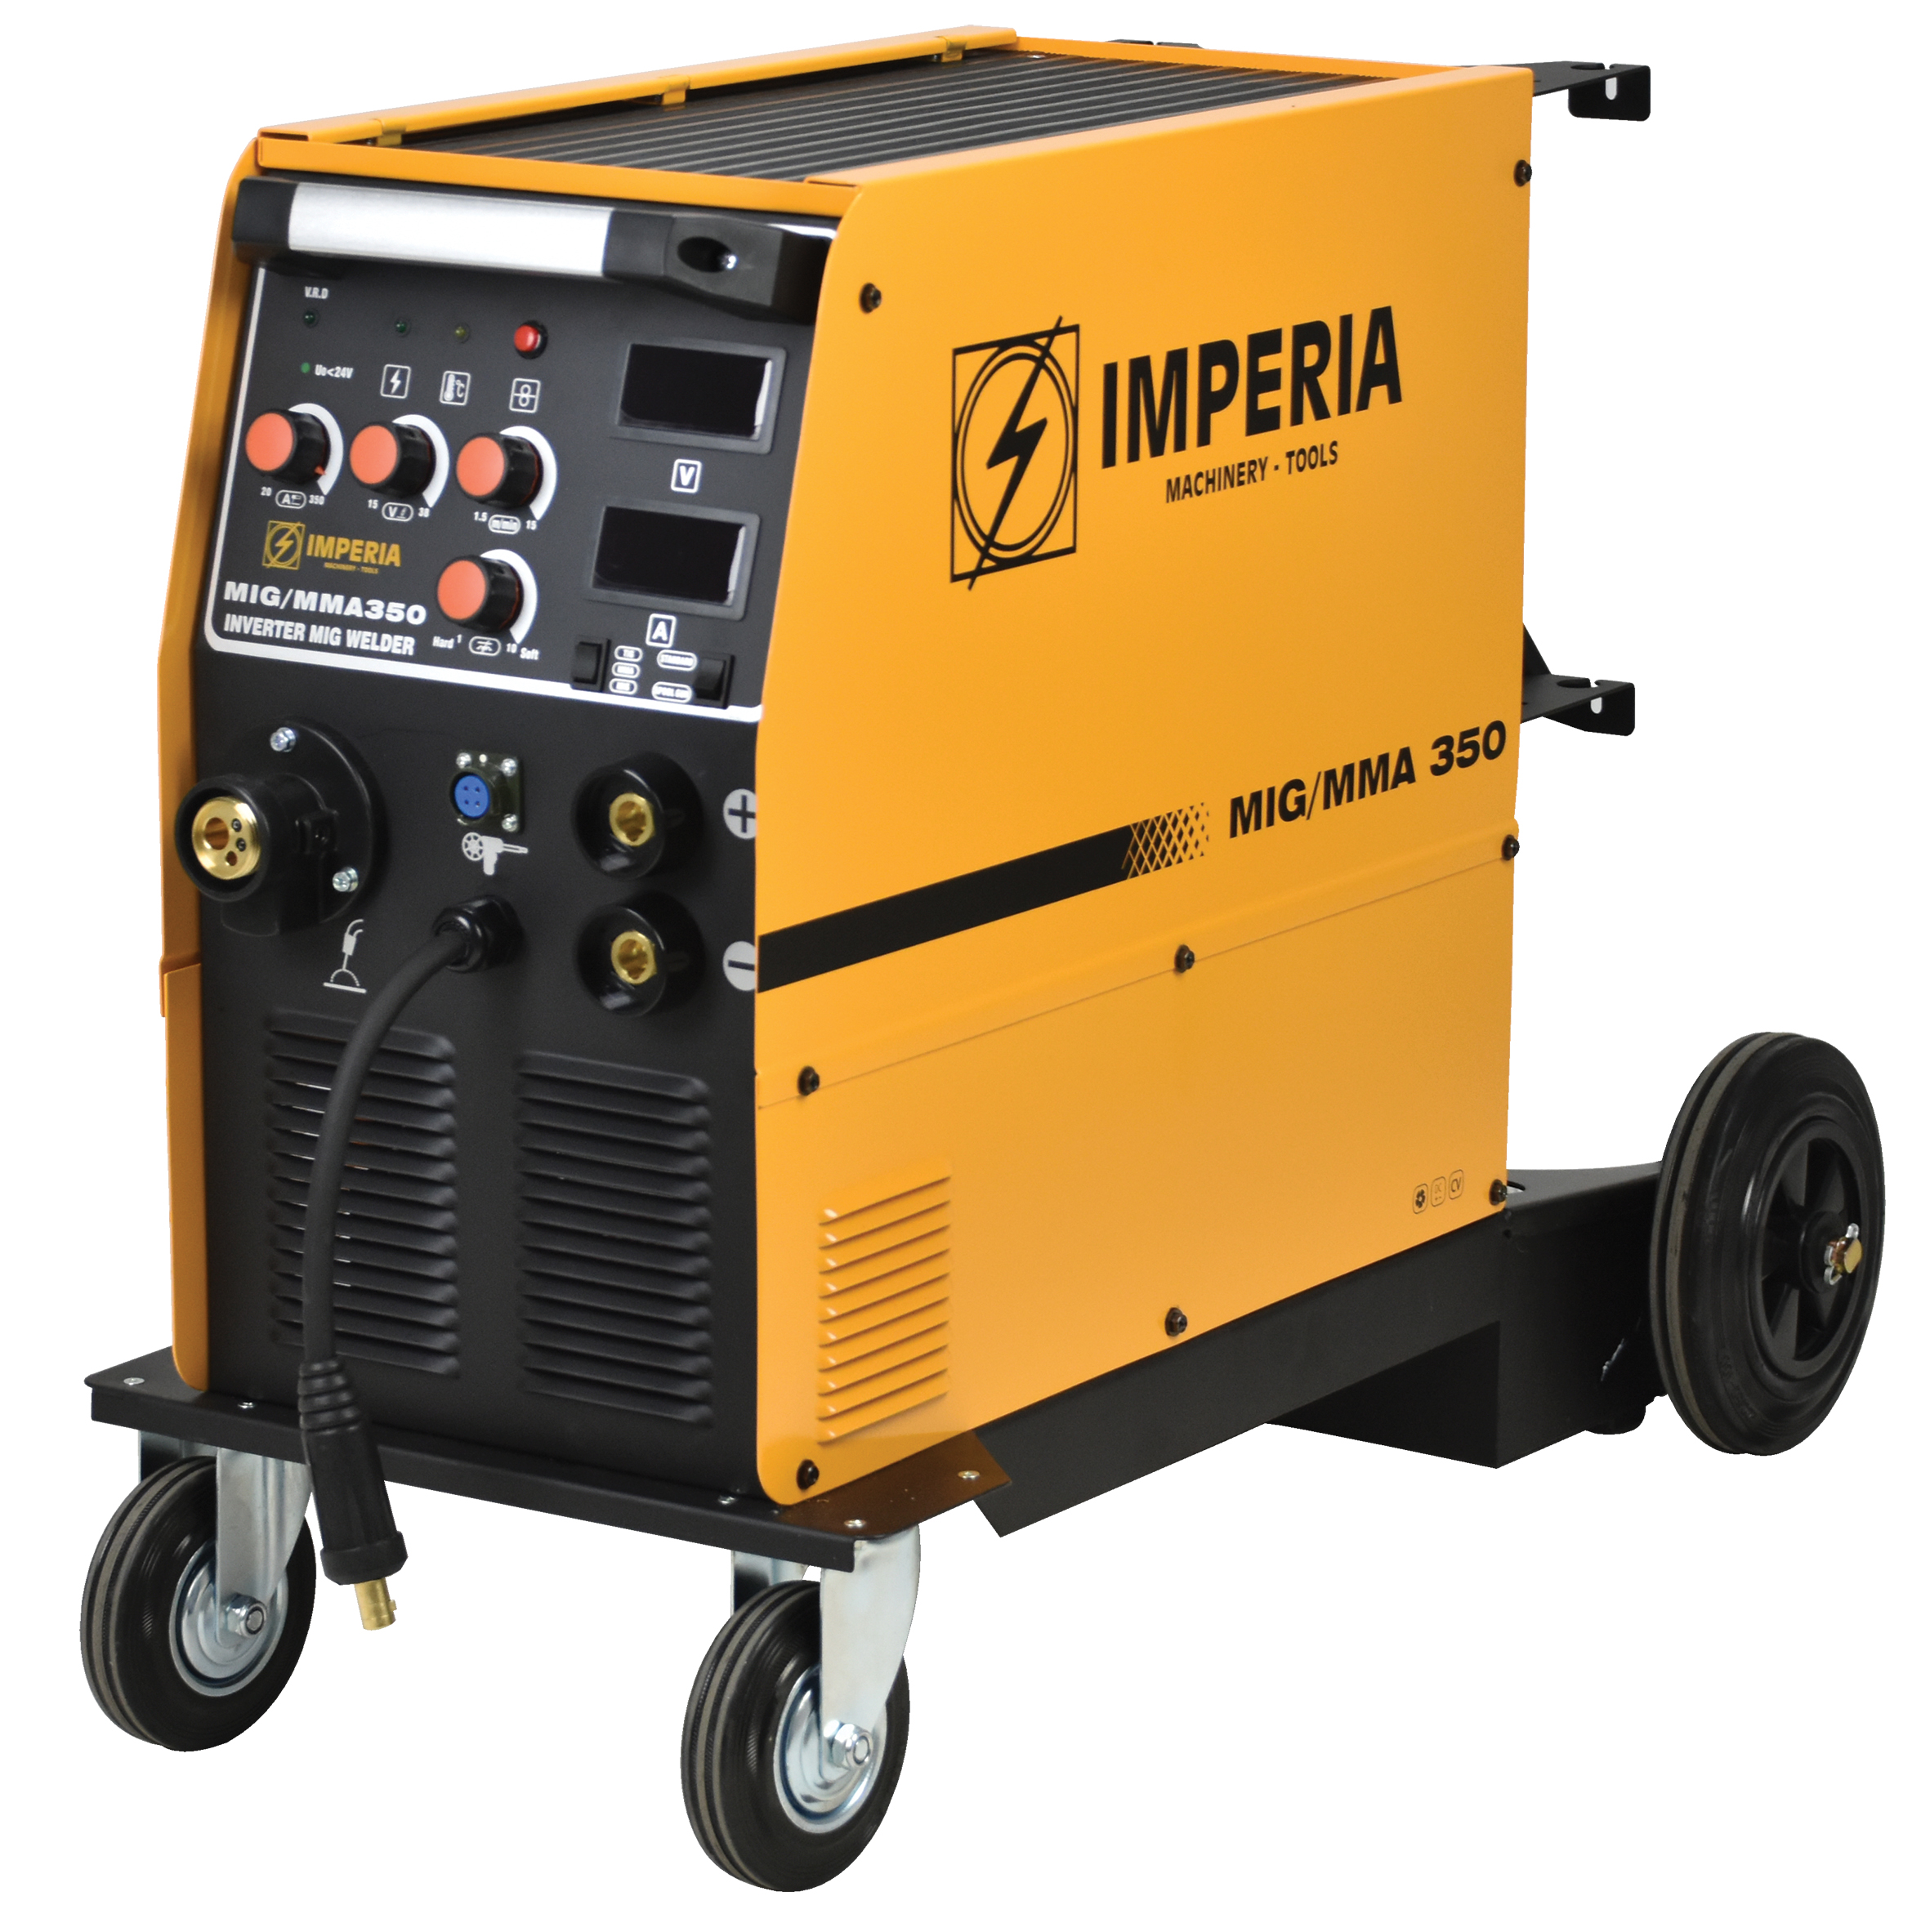 Inverter Welder for Wire and Electrode (MIG/MMA) MIG 350 Imperia